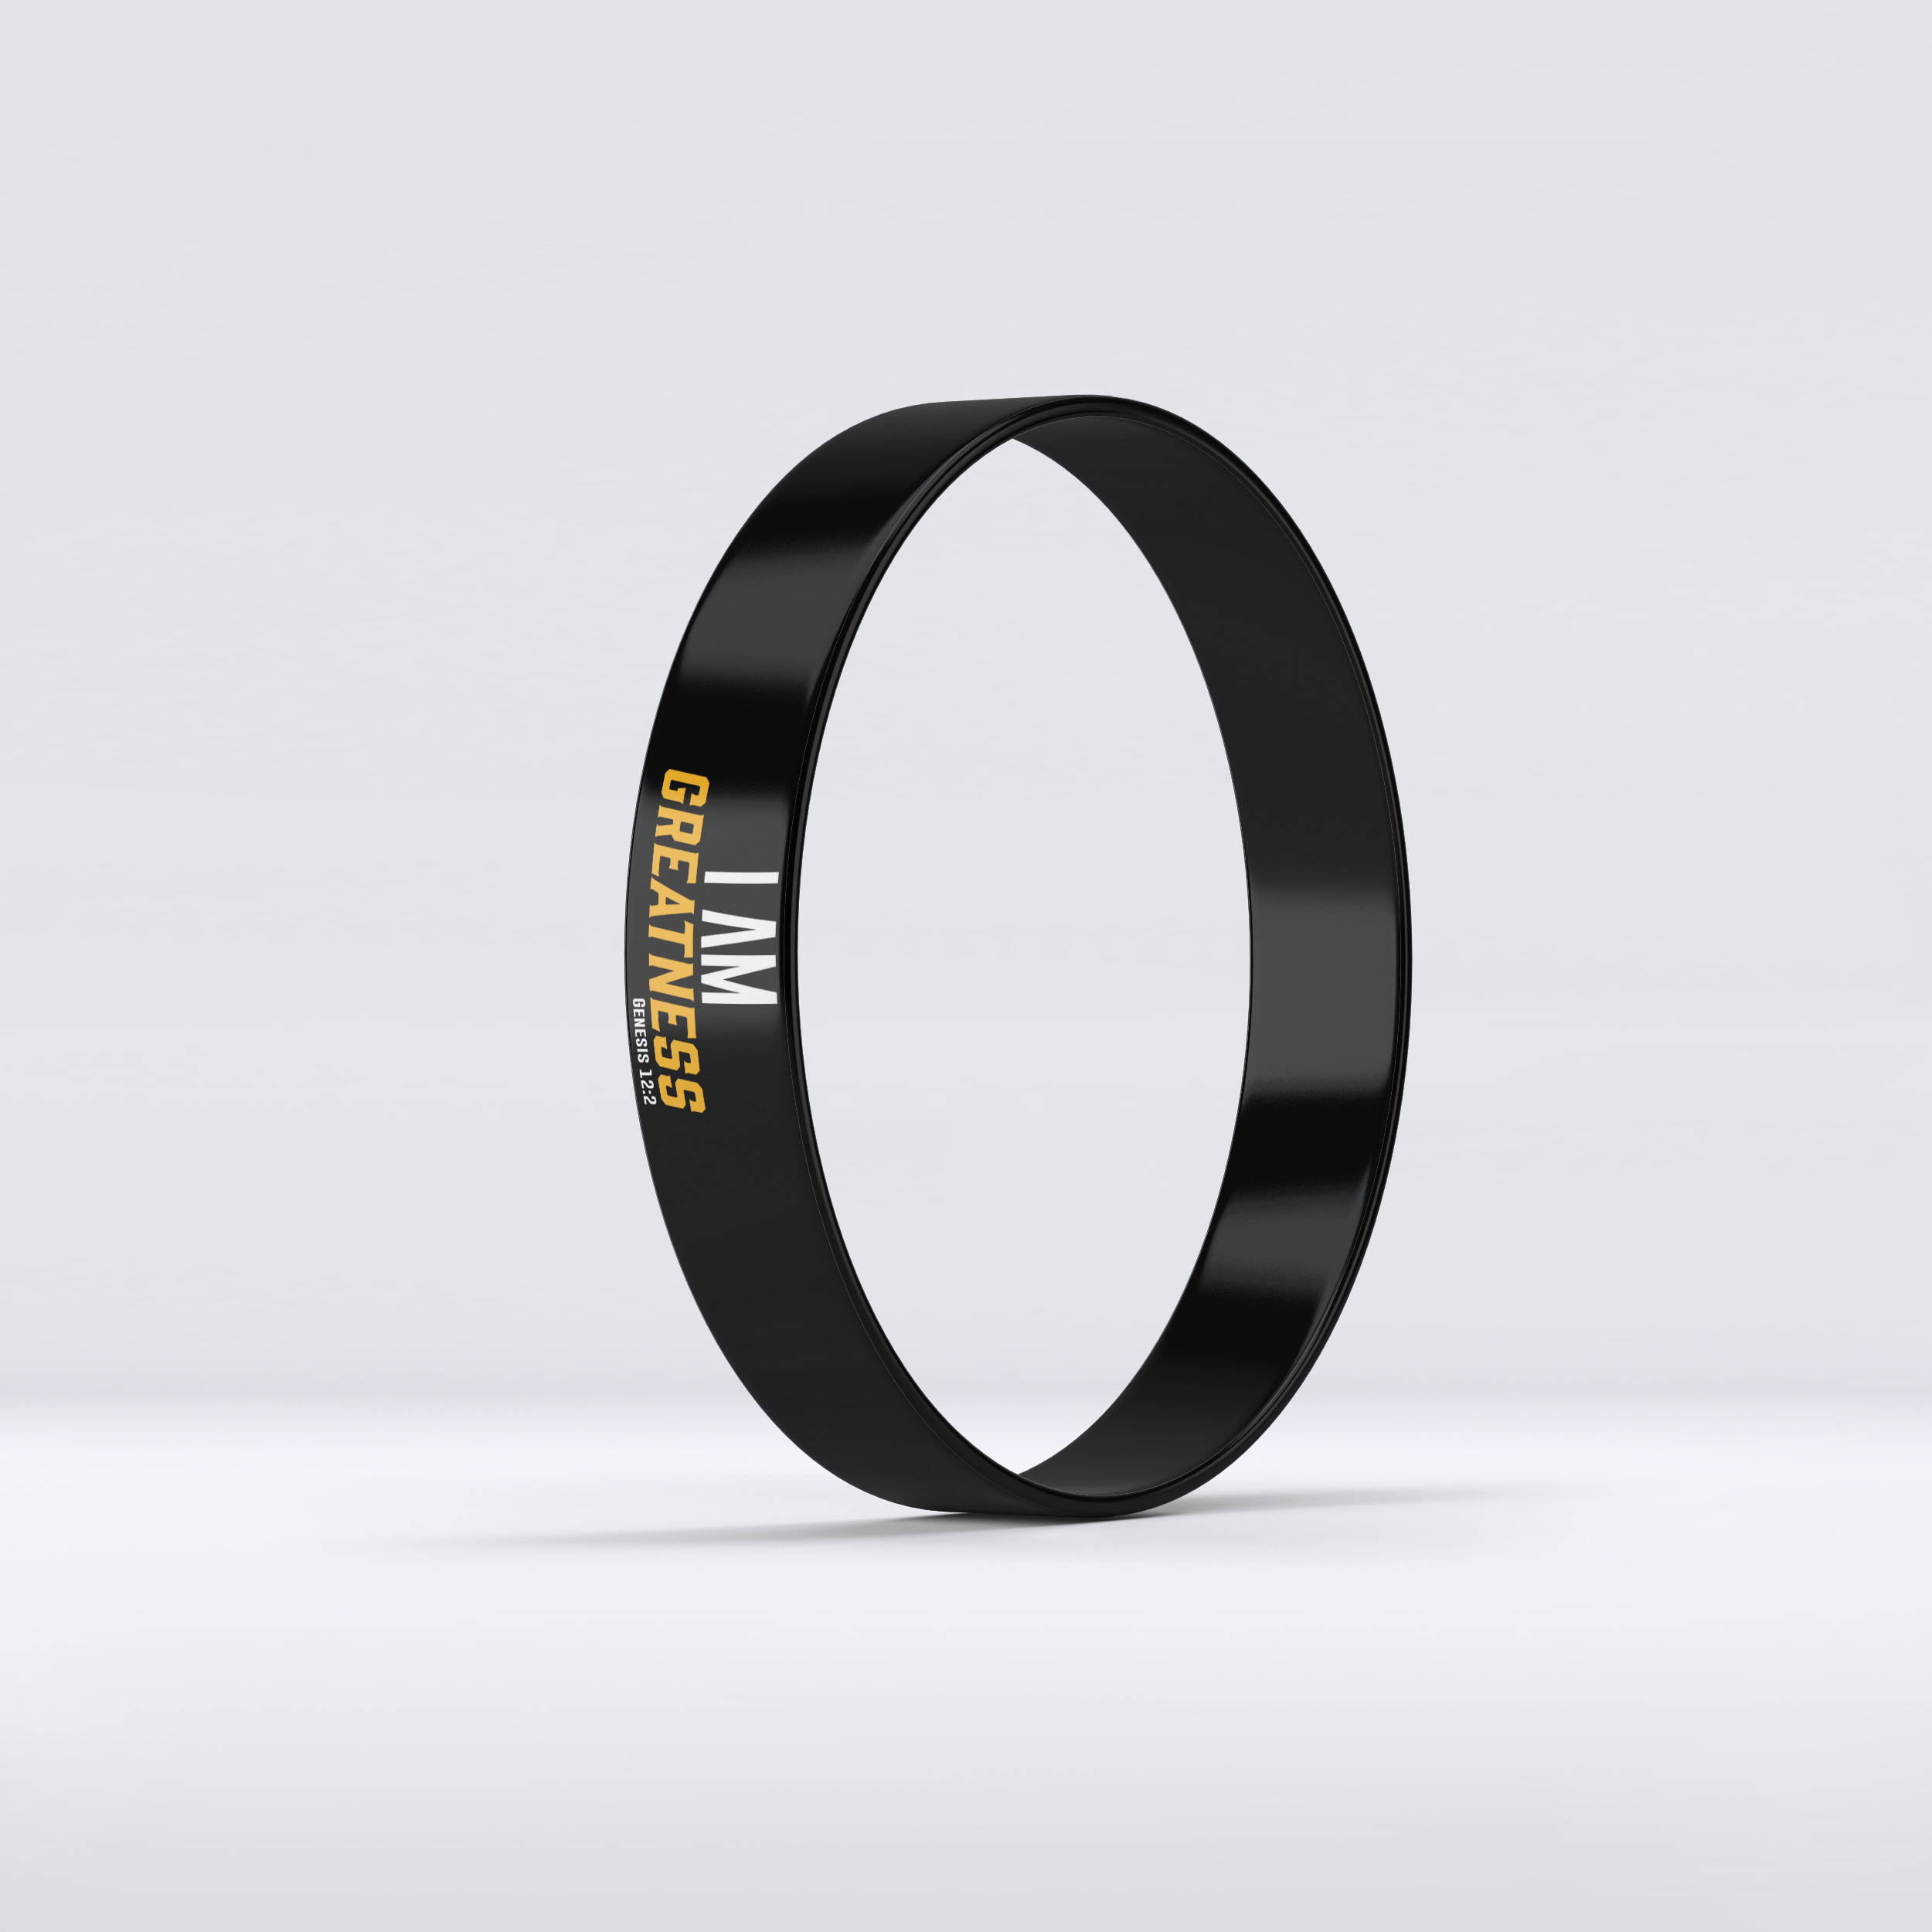 I AM Greatness wristband in black, white, and gold lettering.